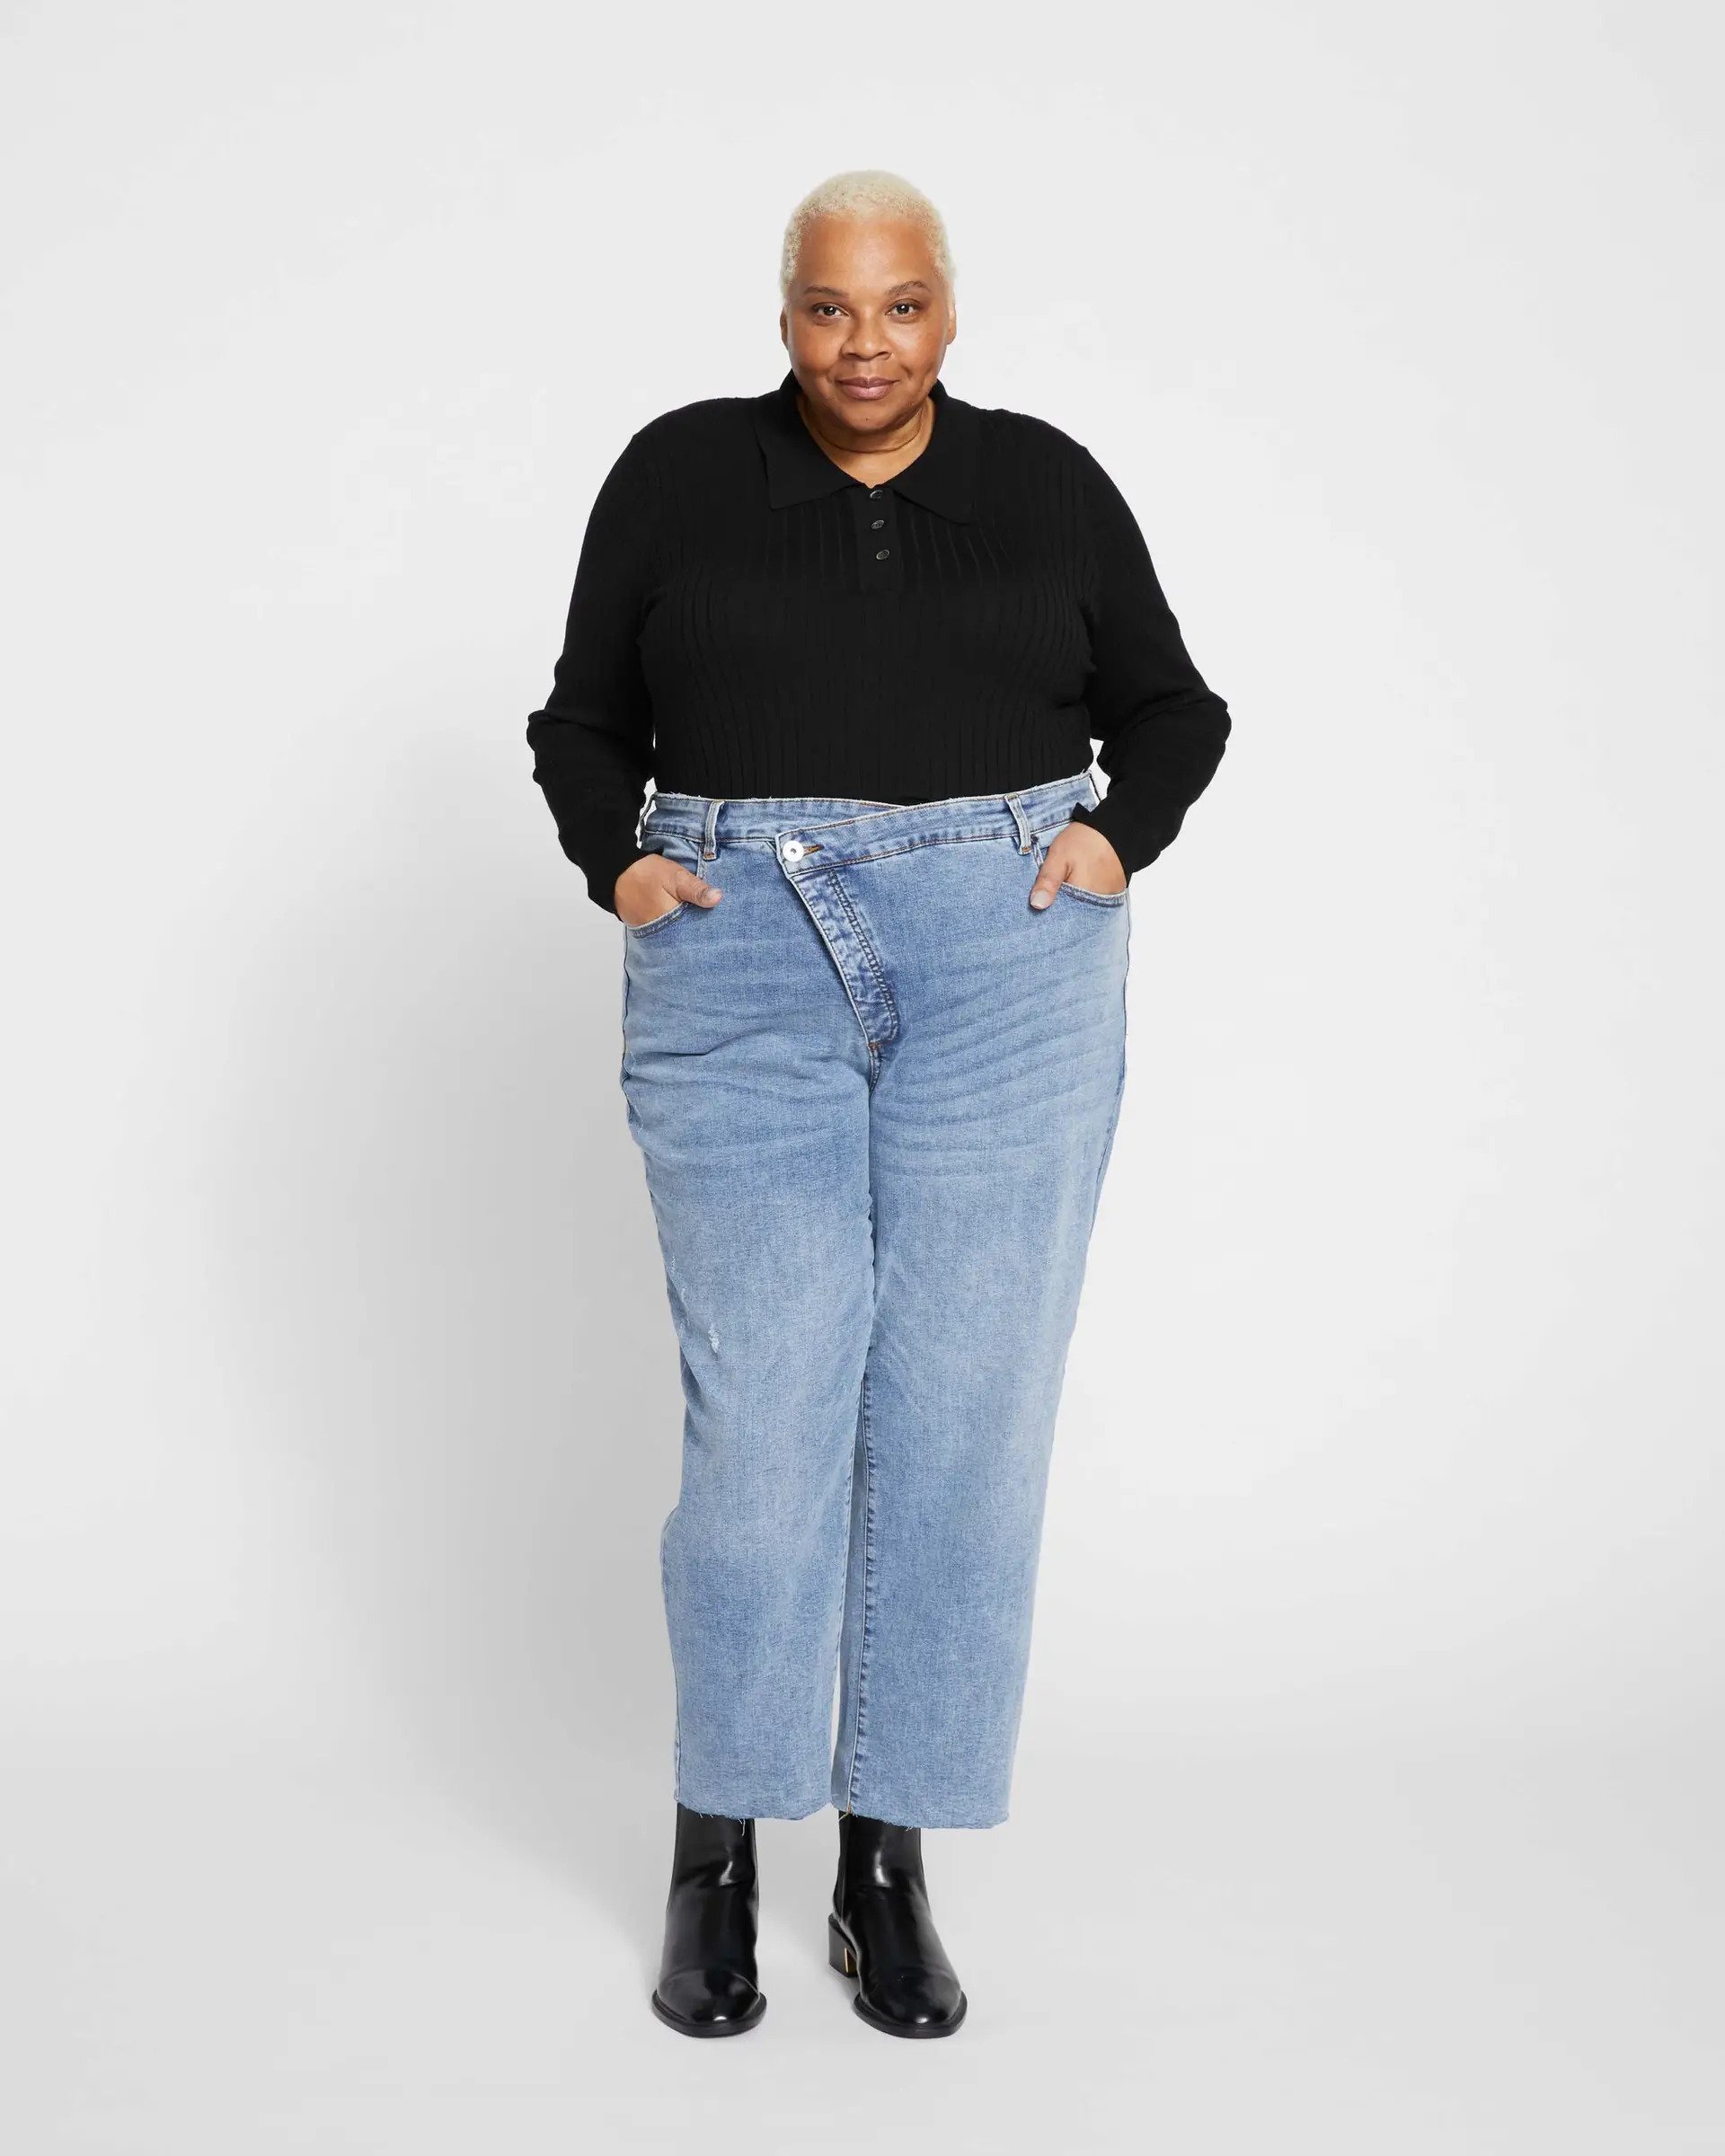 13 Best Jeans for Thick Thighs | Well+Good